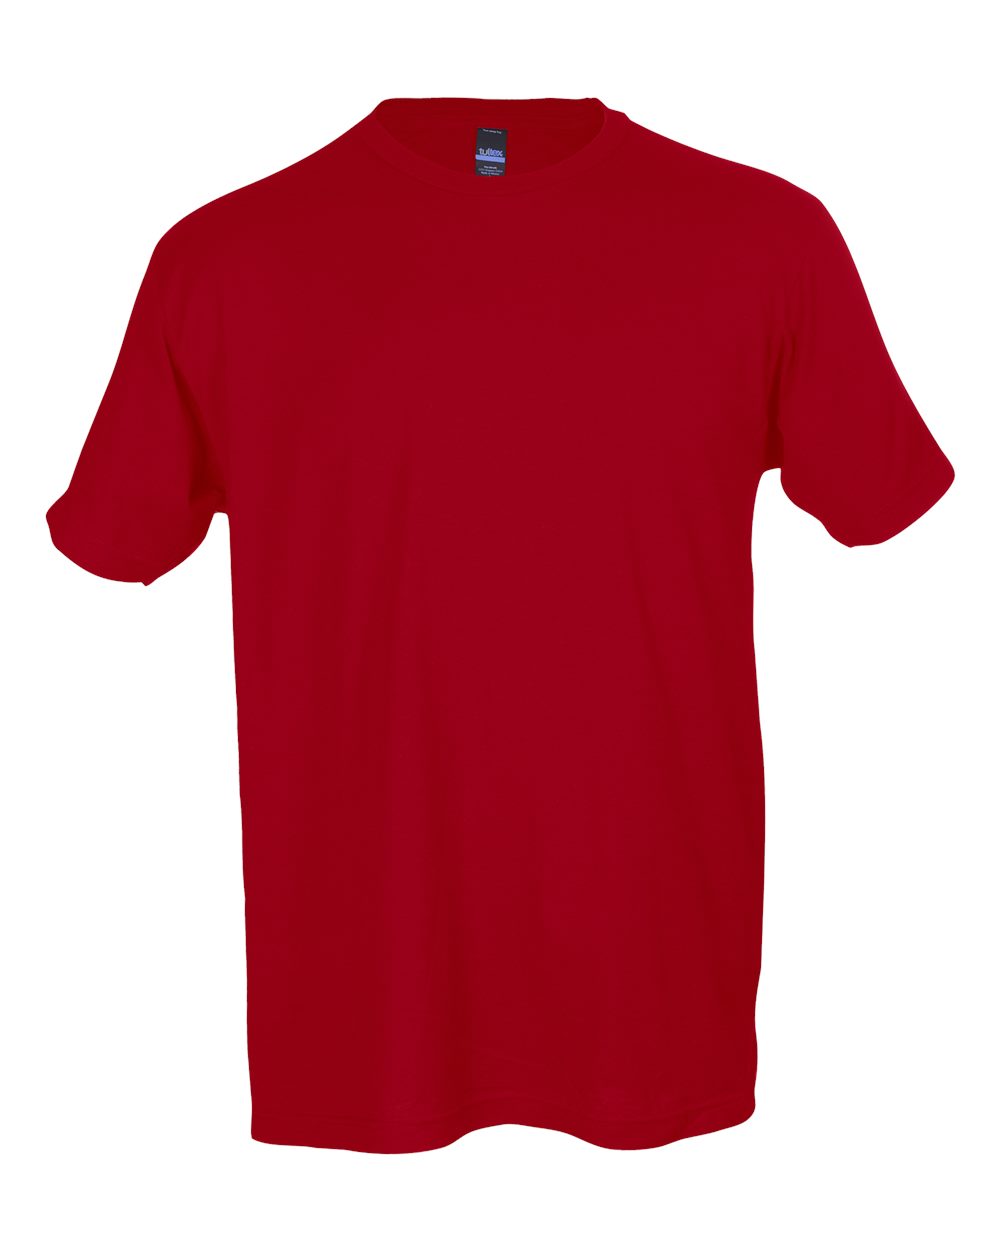 Pretreated Tultex 202 Unisex Fine Jersey T-Shirt - Red